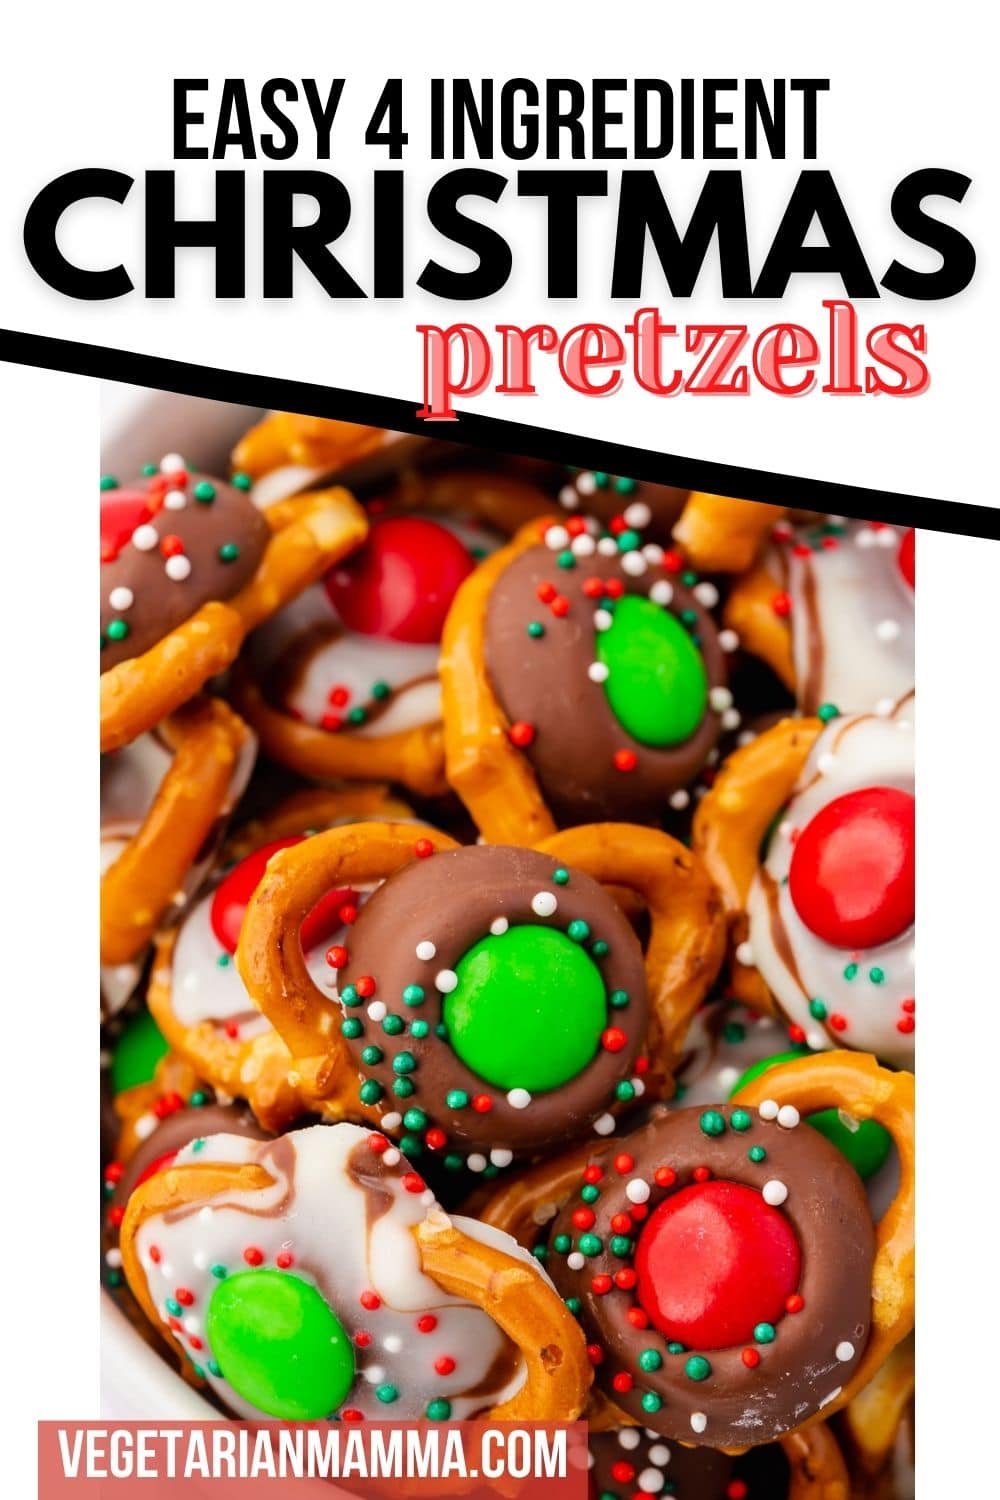 Sweet and salty Christmas Pretzels are so easy to make! We're taking gluten-free pretzel twists and topping them with melted Hershey's kisses, holiday M&Ms, and festive sprinkles. These are the perfect poppable snack for your holiday parties. #ChristmasPretzels #PretzelChristmasTreats #ChristmasPretzelsRecipe